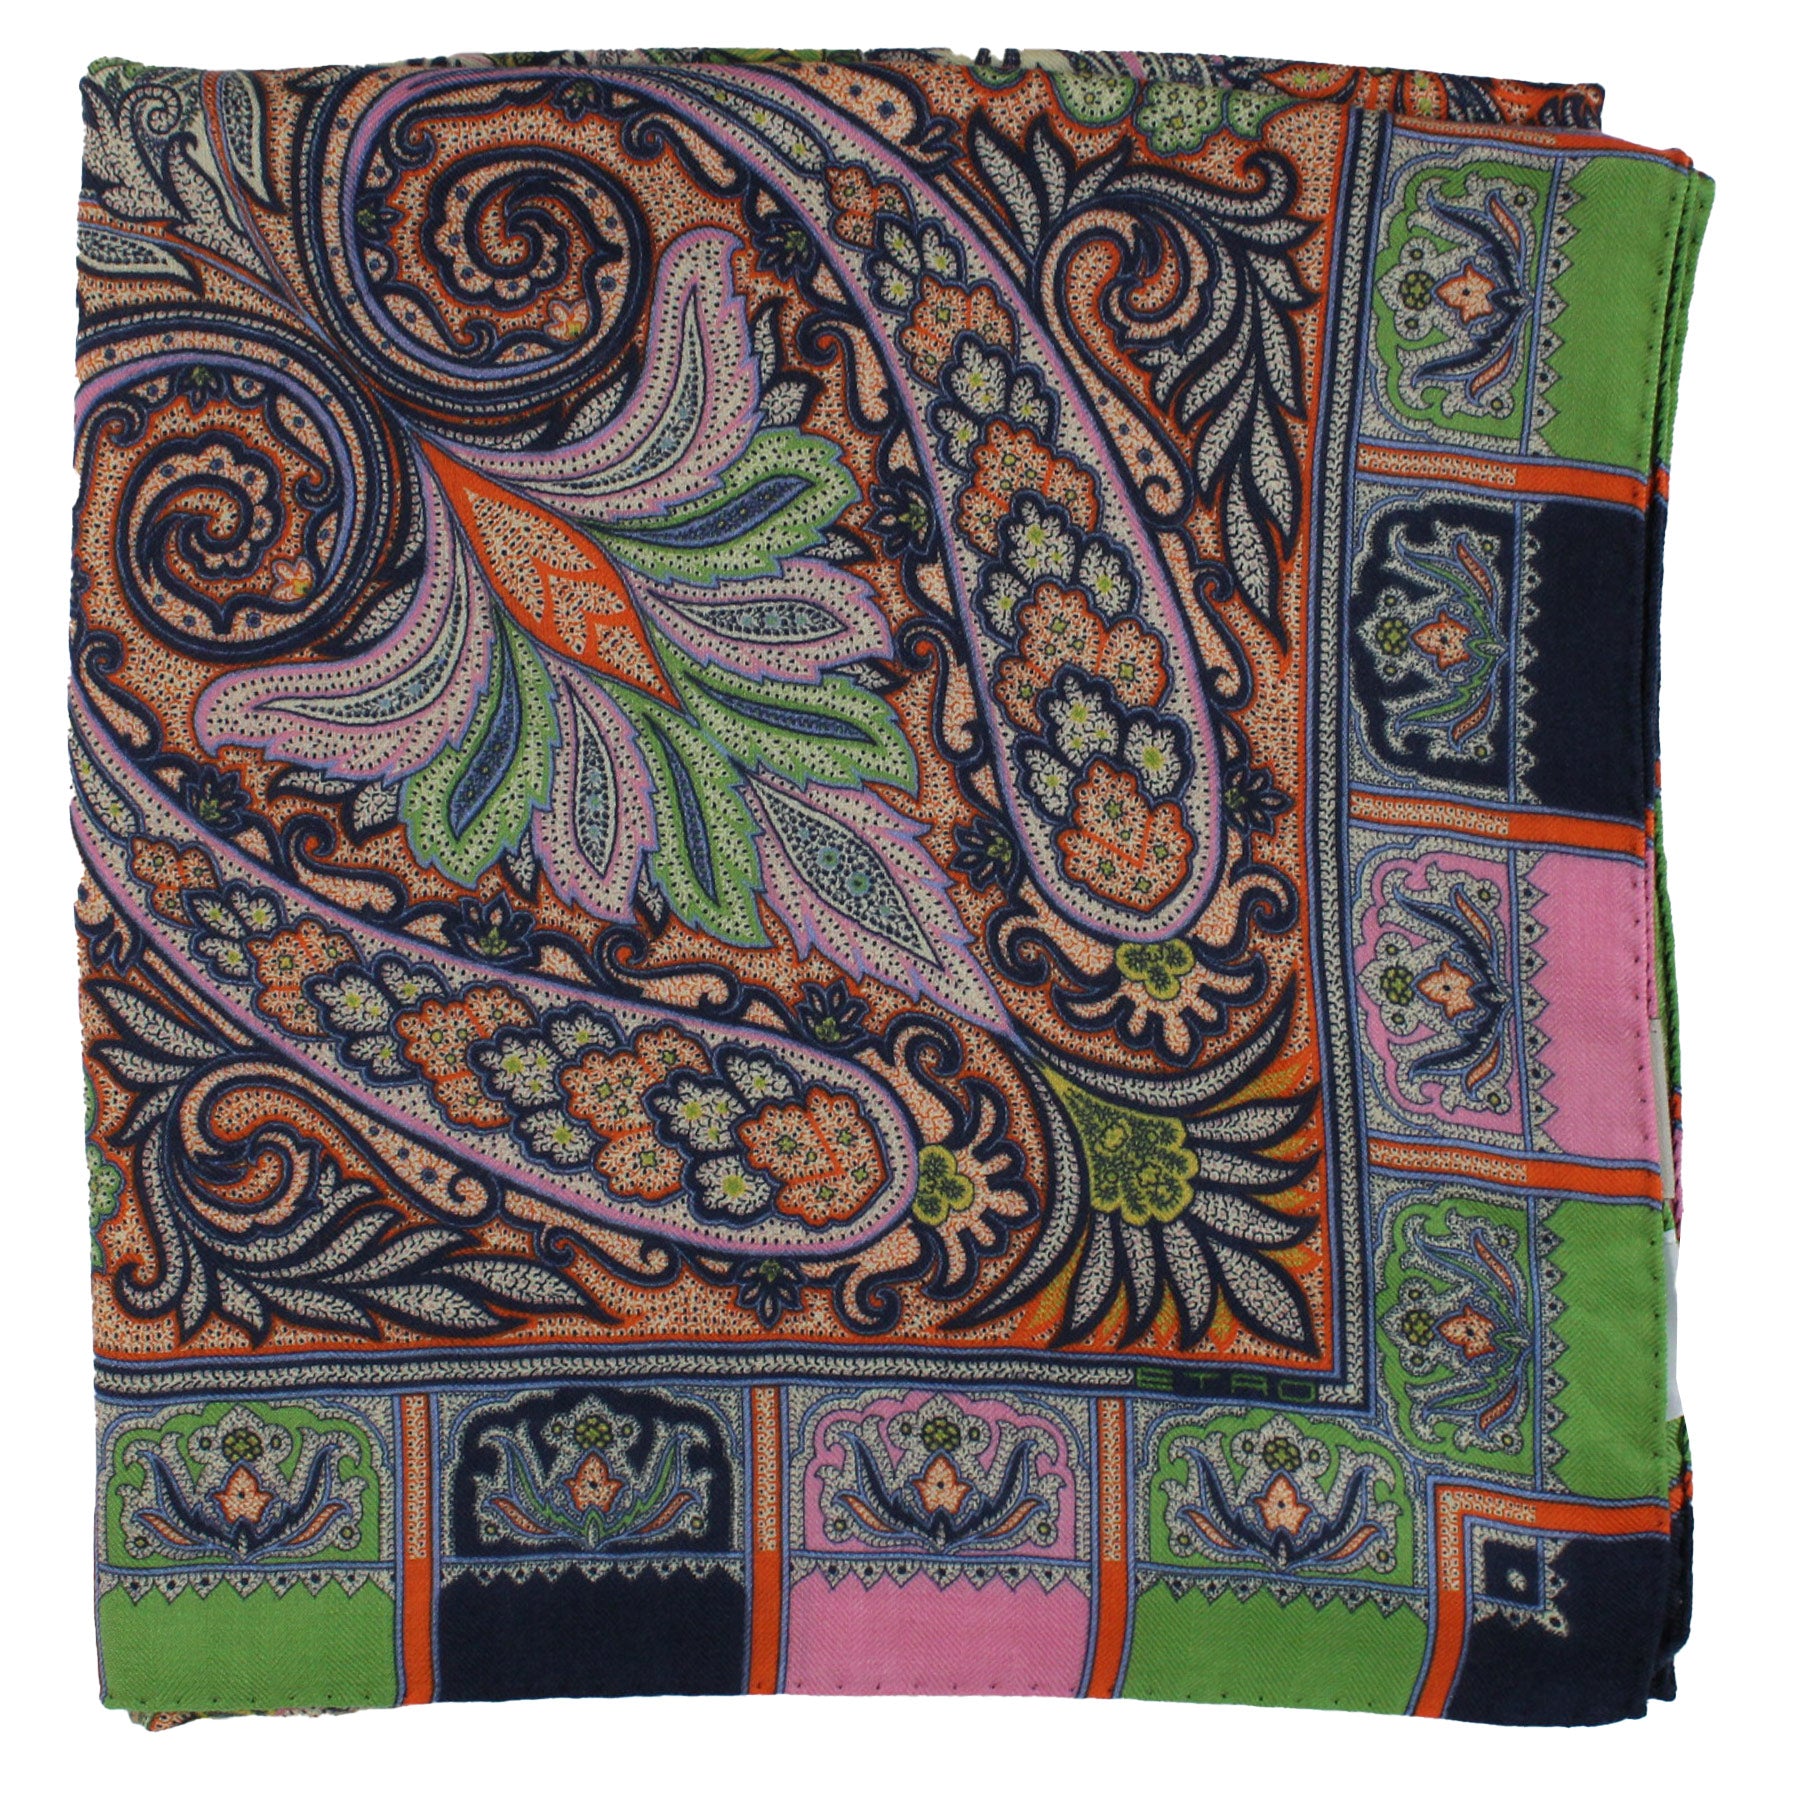 Etro Scarf Ornamental Paisley & Floral - Extra Large Square Cashmere Silk Shawl